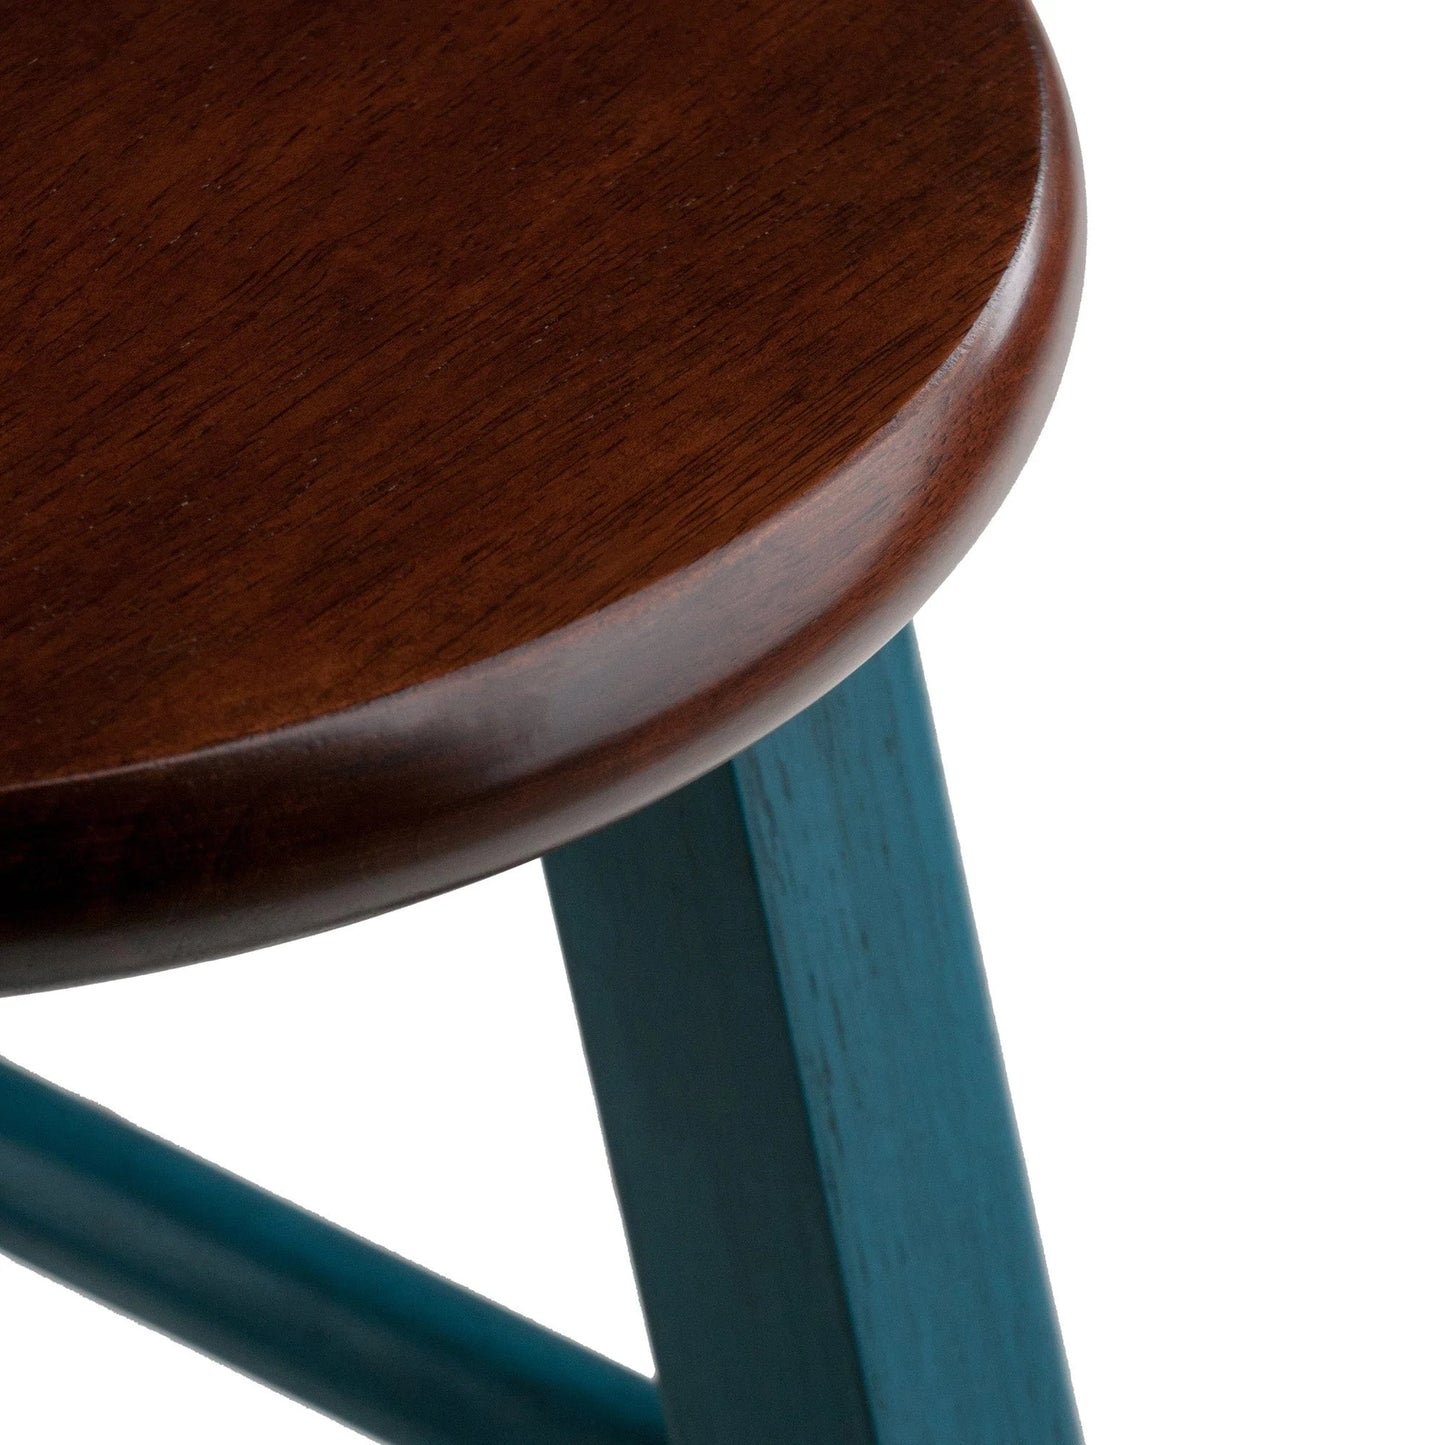 WINSOME Stool Ivy Bar Stool, Rustic Teal and Walnut